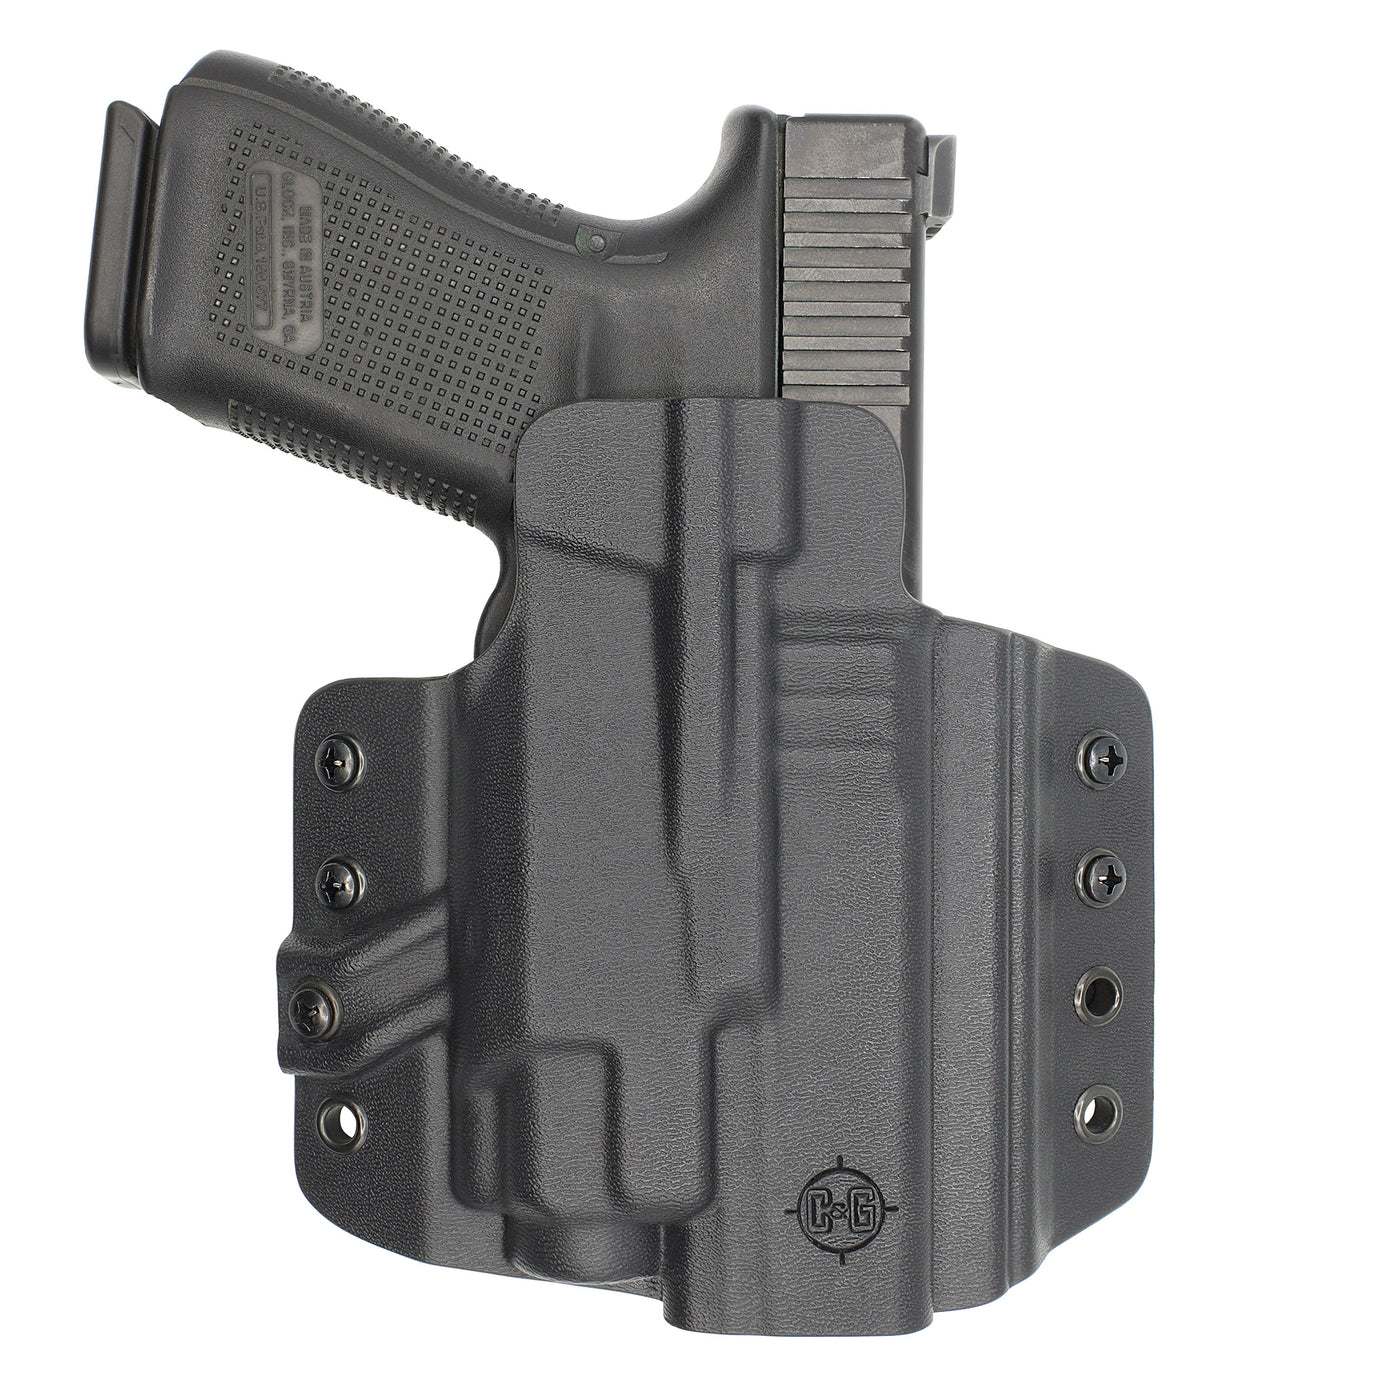 C&G Holsters quickship OWB Tactical Shadow Systems Streamlight TLR8 holstered